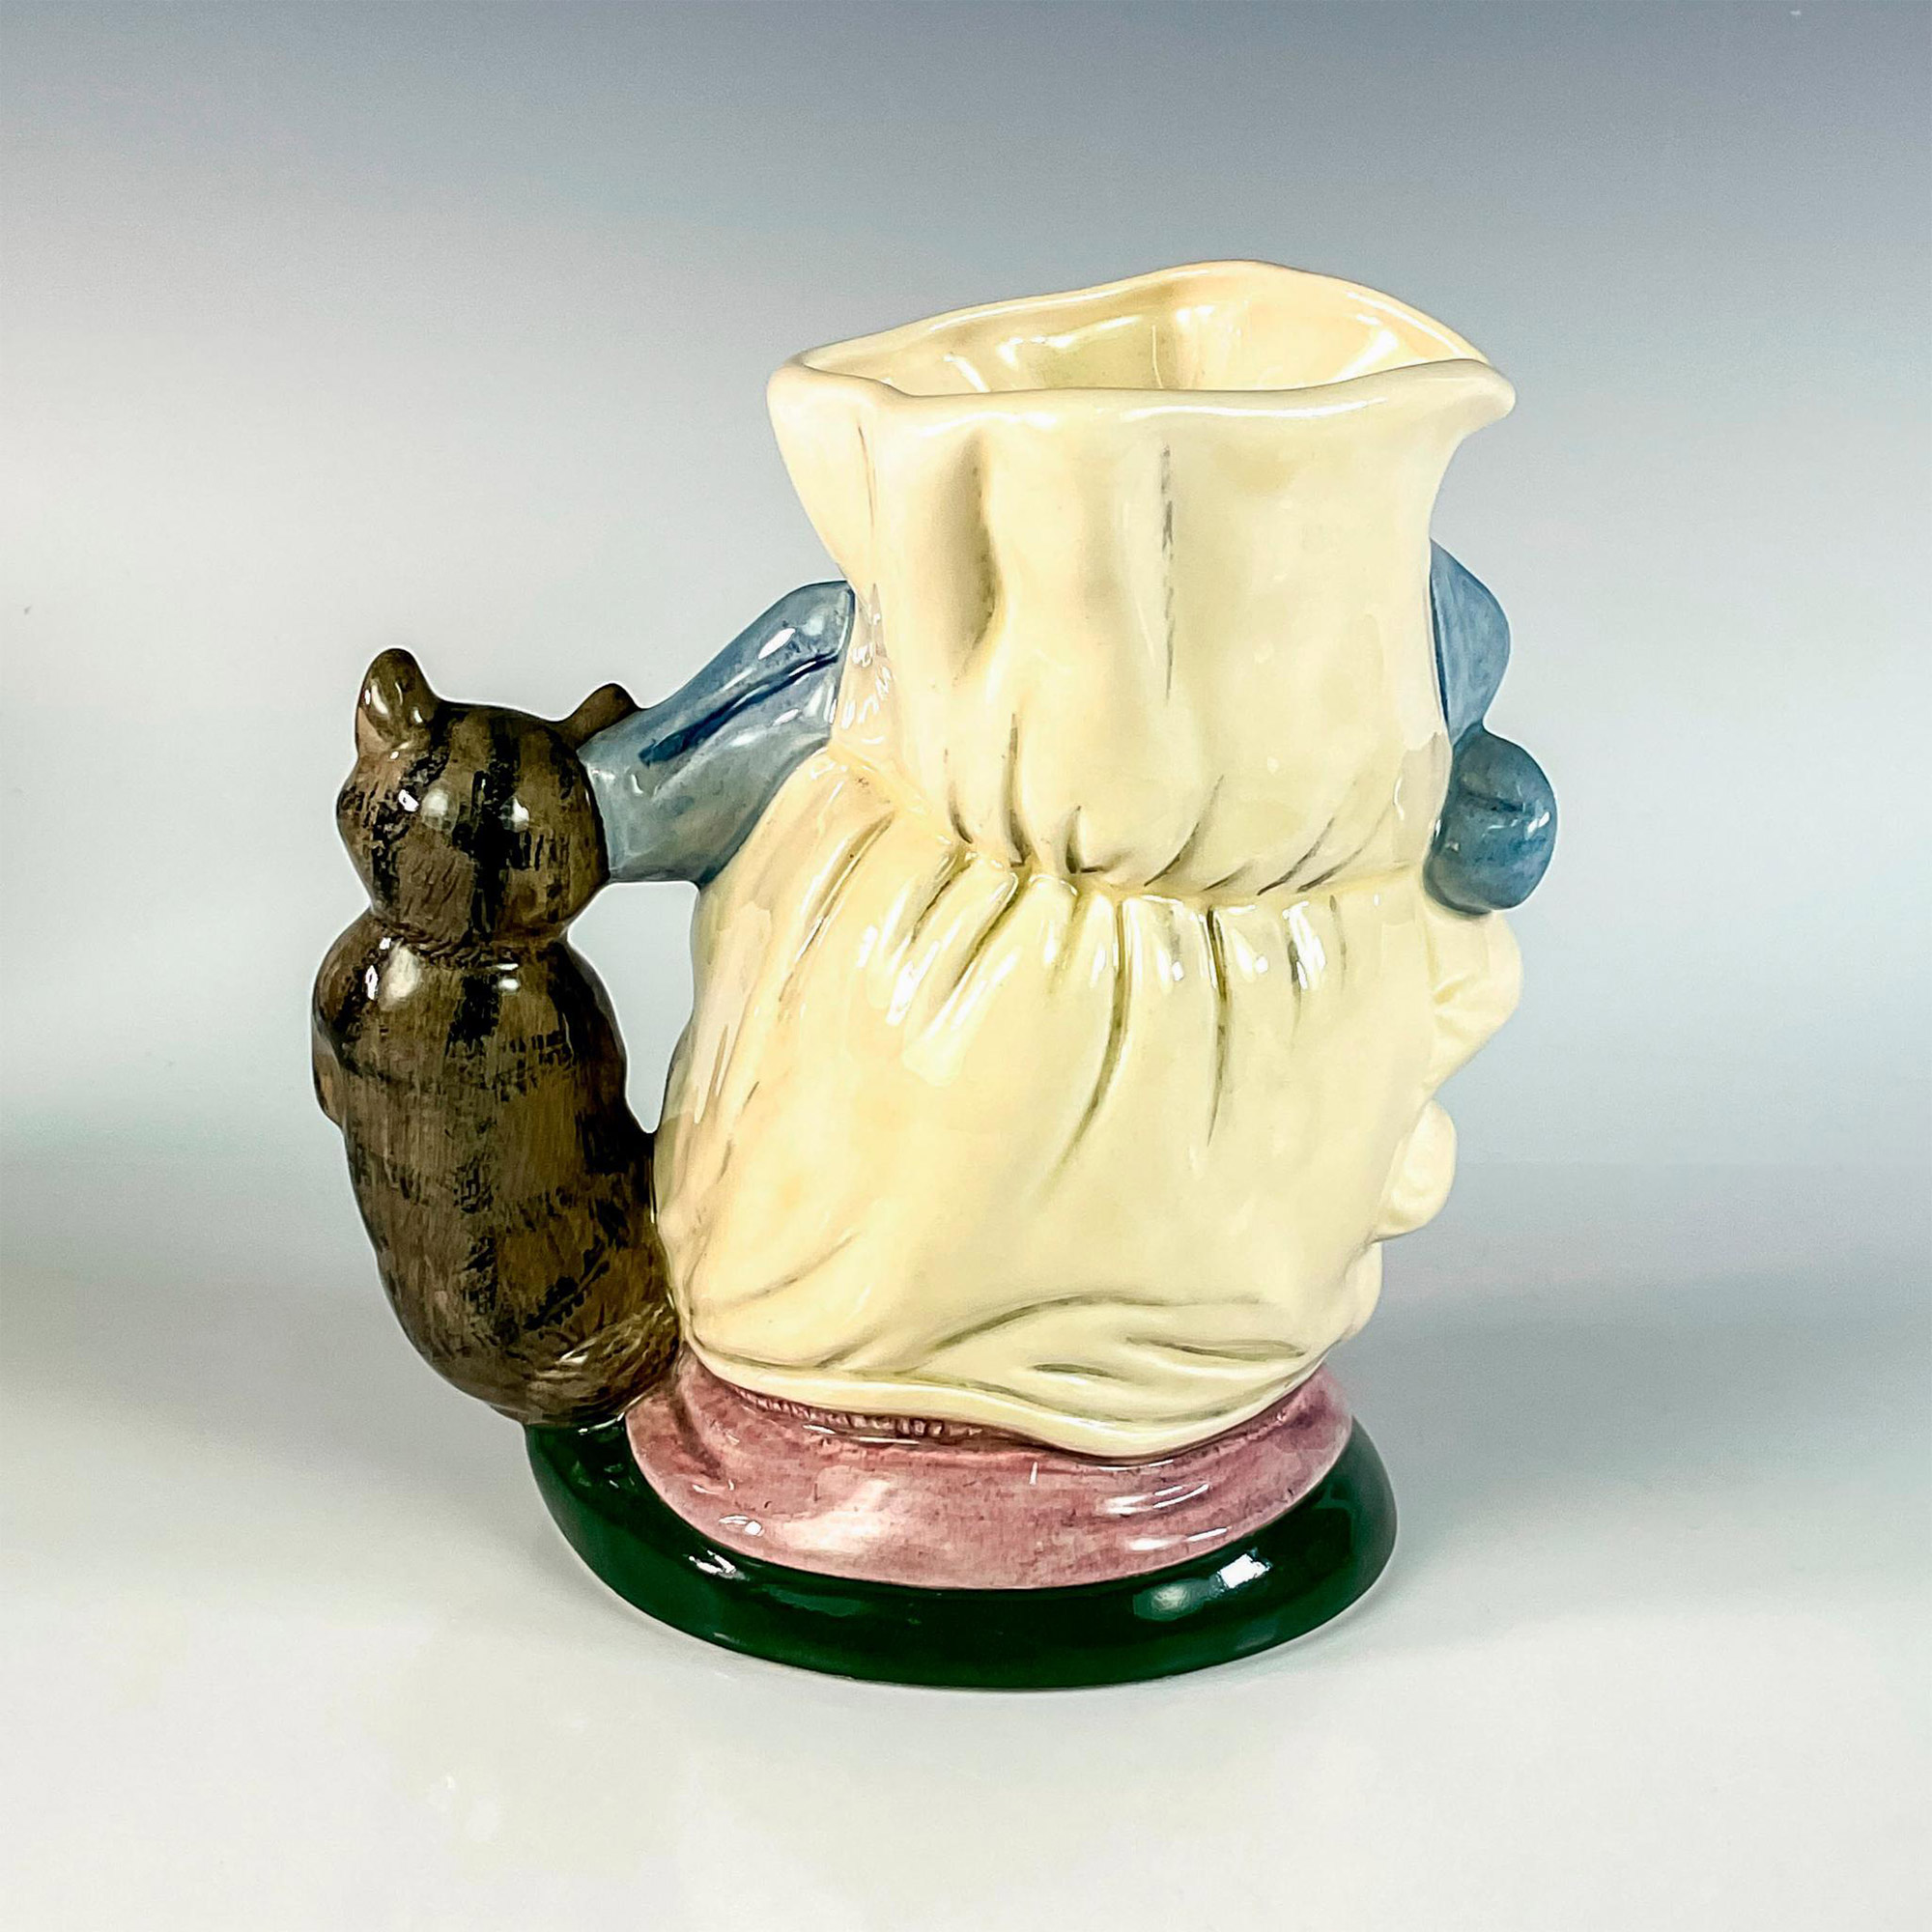 Cook and Cheshire Cat D6842 - Large - Royal Doulton Character Jug - Image 2 of 3